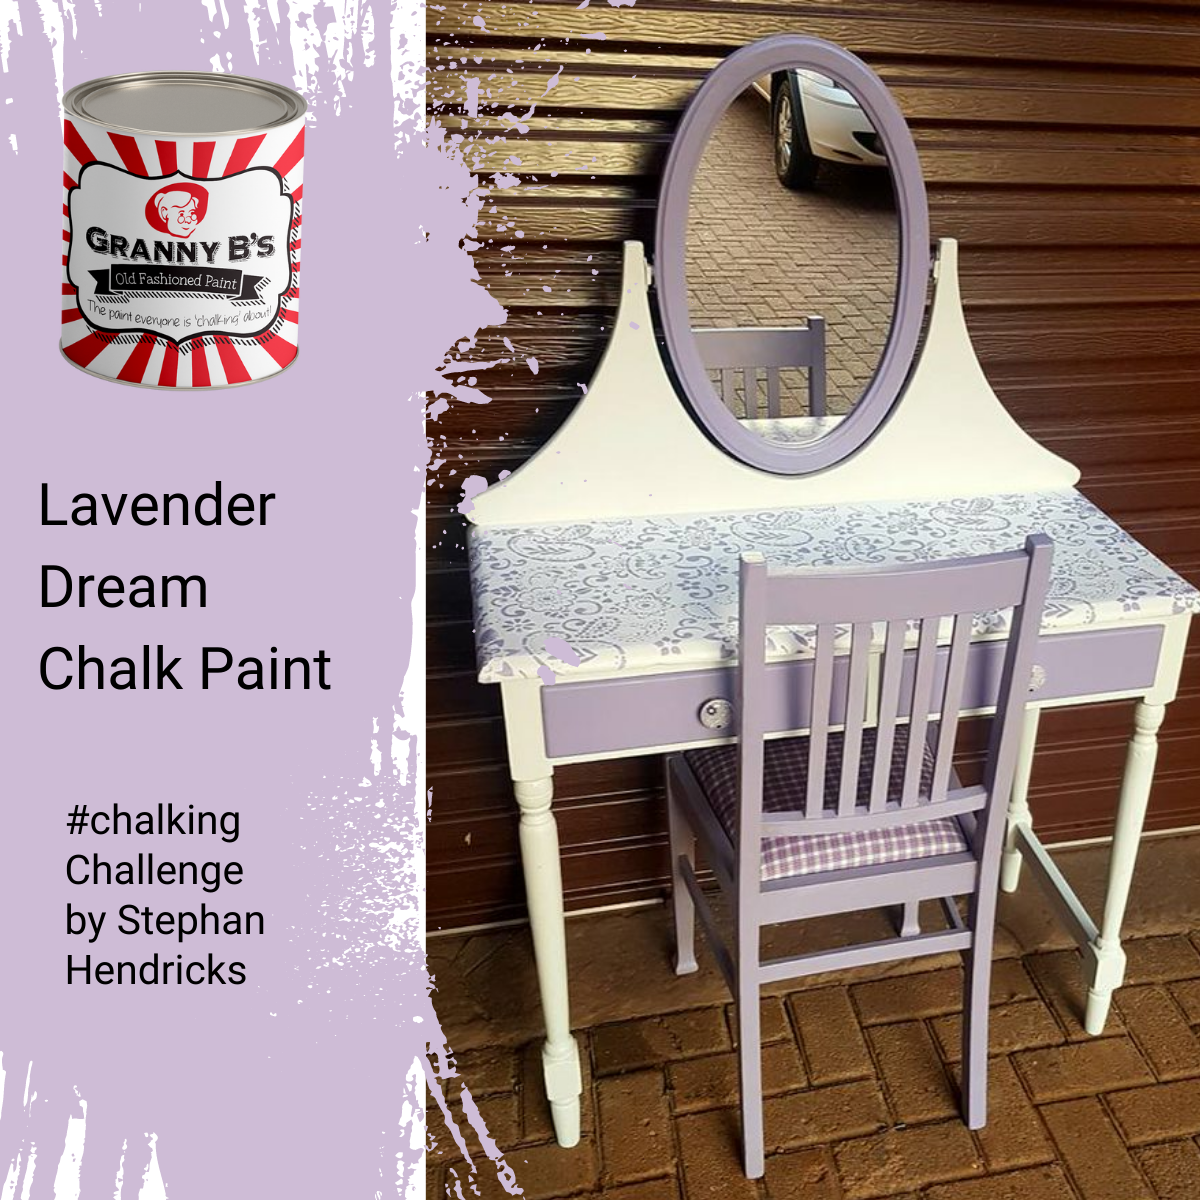 Chalkpaint - Lavender Dream (Lavender) - Granny B's Old Fashioned Paint